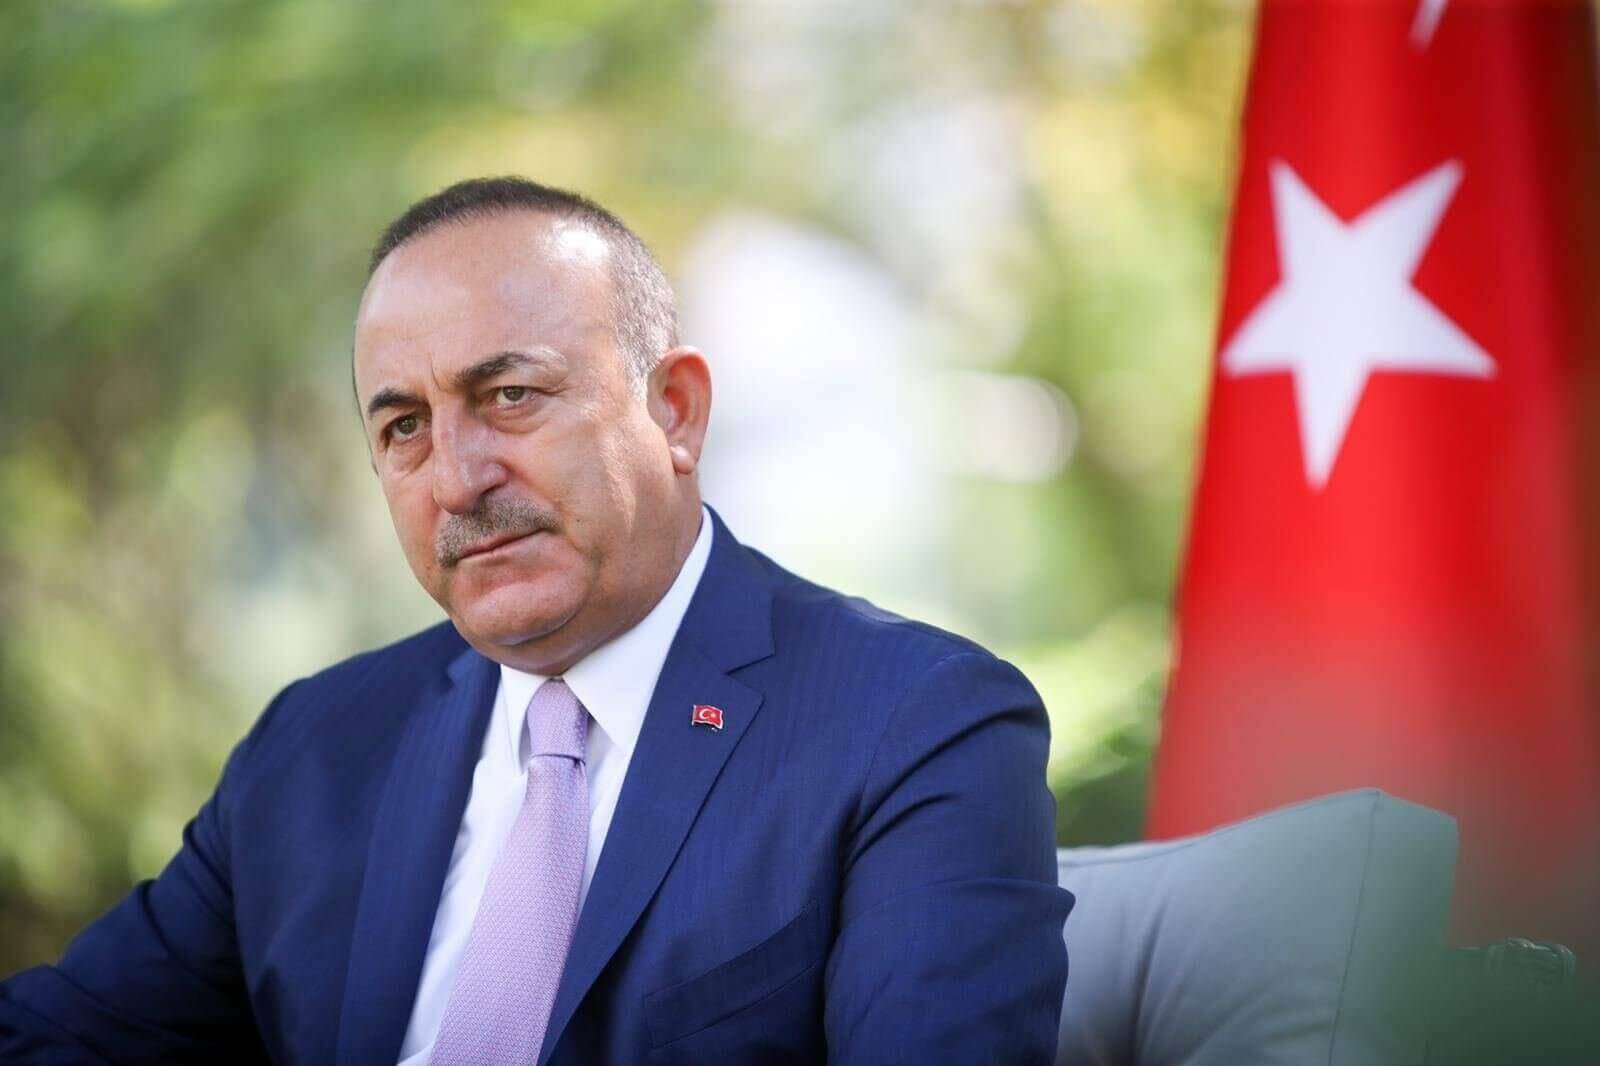 Turkey plans military offensive against Israel under the umbrella of UN decisions